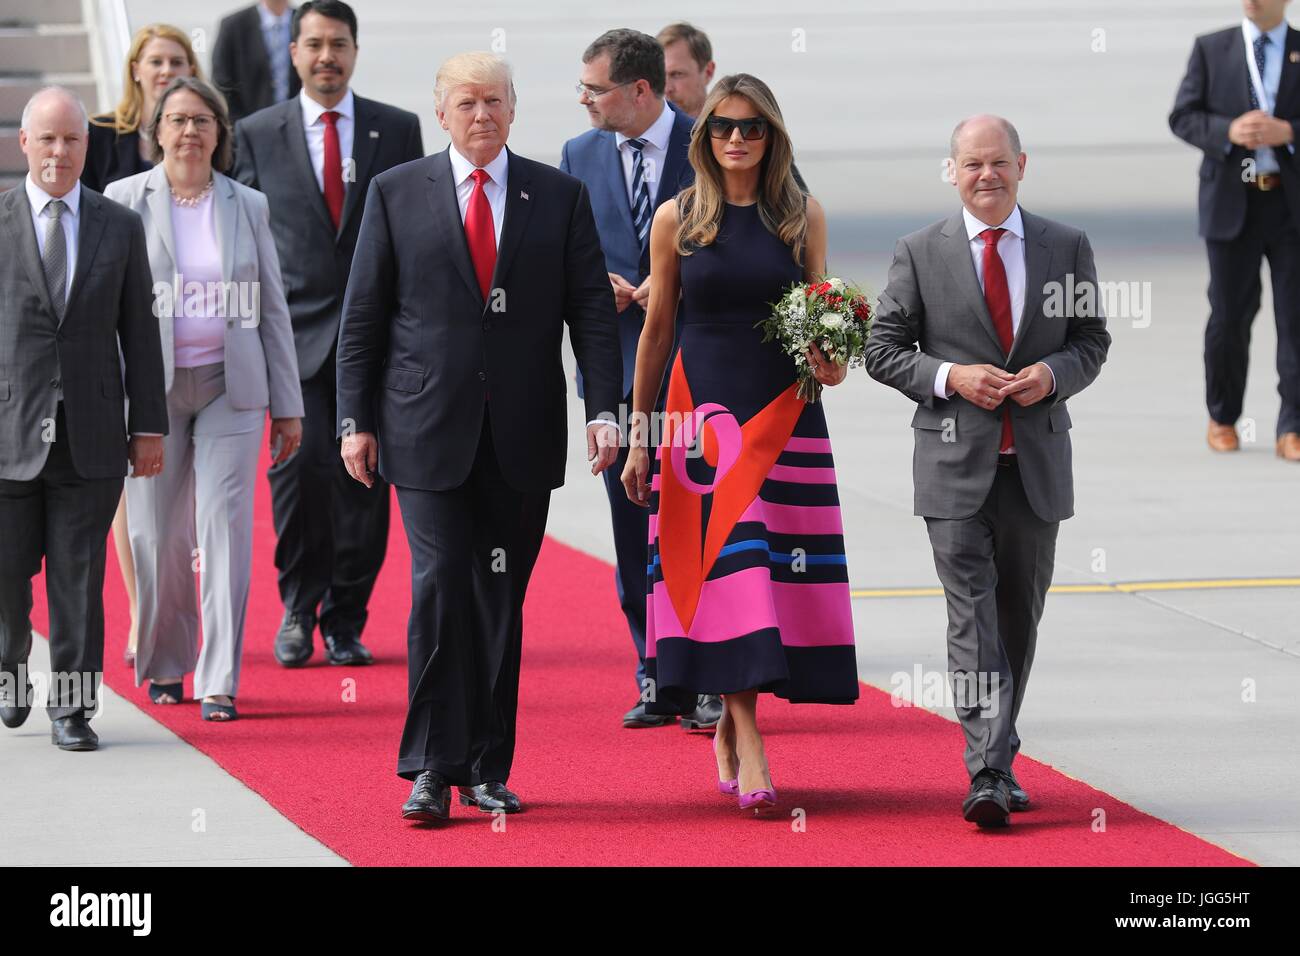 Hamburg, Germany. 06th July, 2017. U.S. President Donald Trump and First Lady Melania Trump are escorted by the Mayor of Hamburg Olaf Scholz, right, and embassy staff on arrival for the start of the G20 Summit meeting at Hamburg Airport July 6, 2017 in Hamburg, Germany. (U.S. State Department via Planetpix) Credit: Planetpix/Alamy Live News Stock Photo